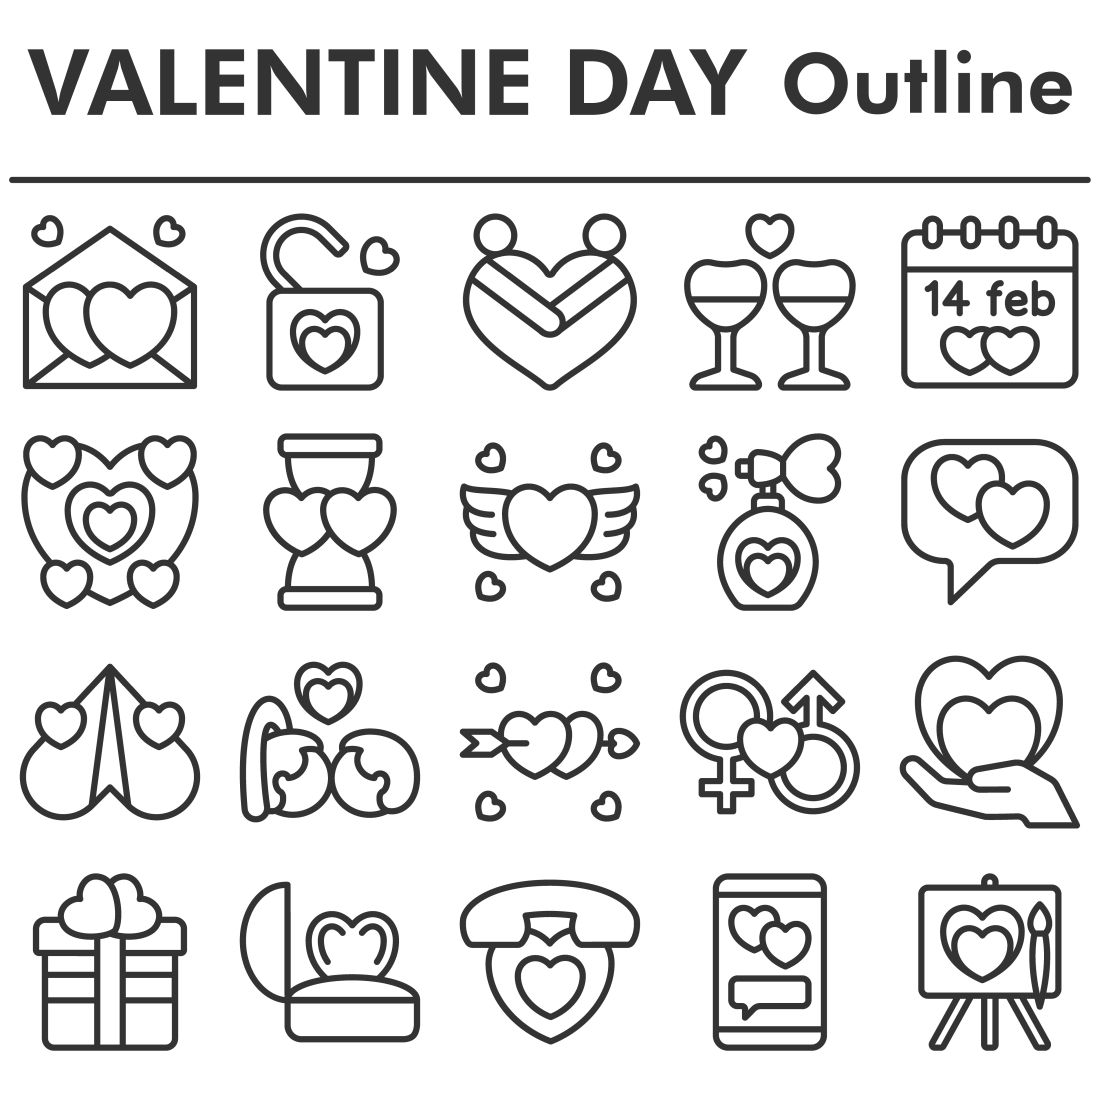 Valentines day icons set, outline style cover image.